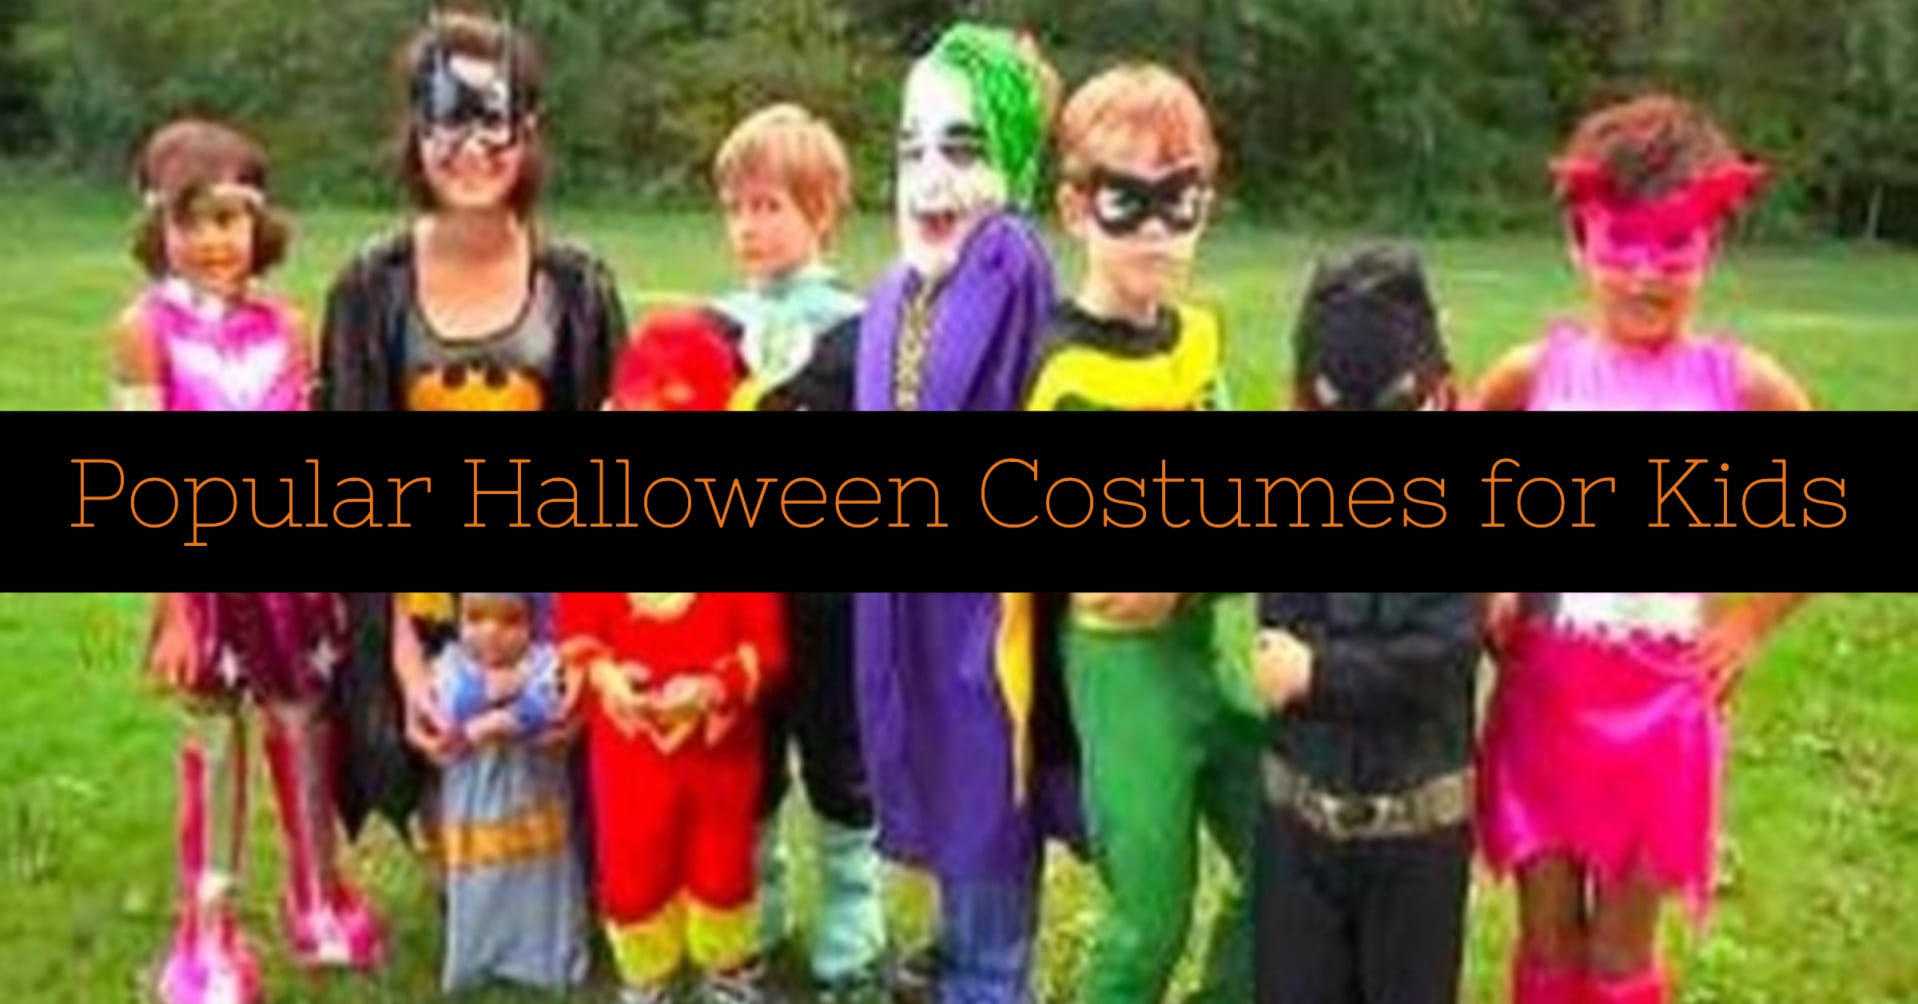 Popular Halloween Costumes for Kids - let's take a look at the most popular Halloween costumes this year that boys and girls REALLY want to wear trick-or-treating.